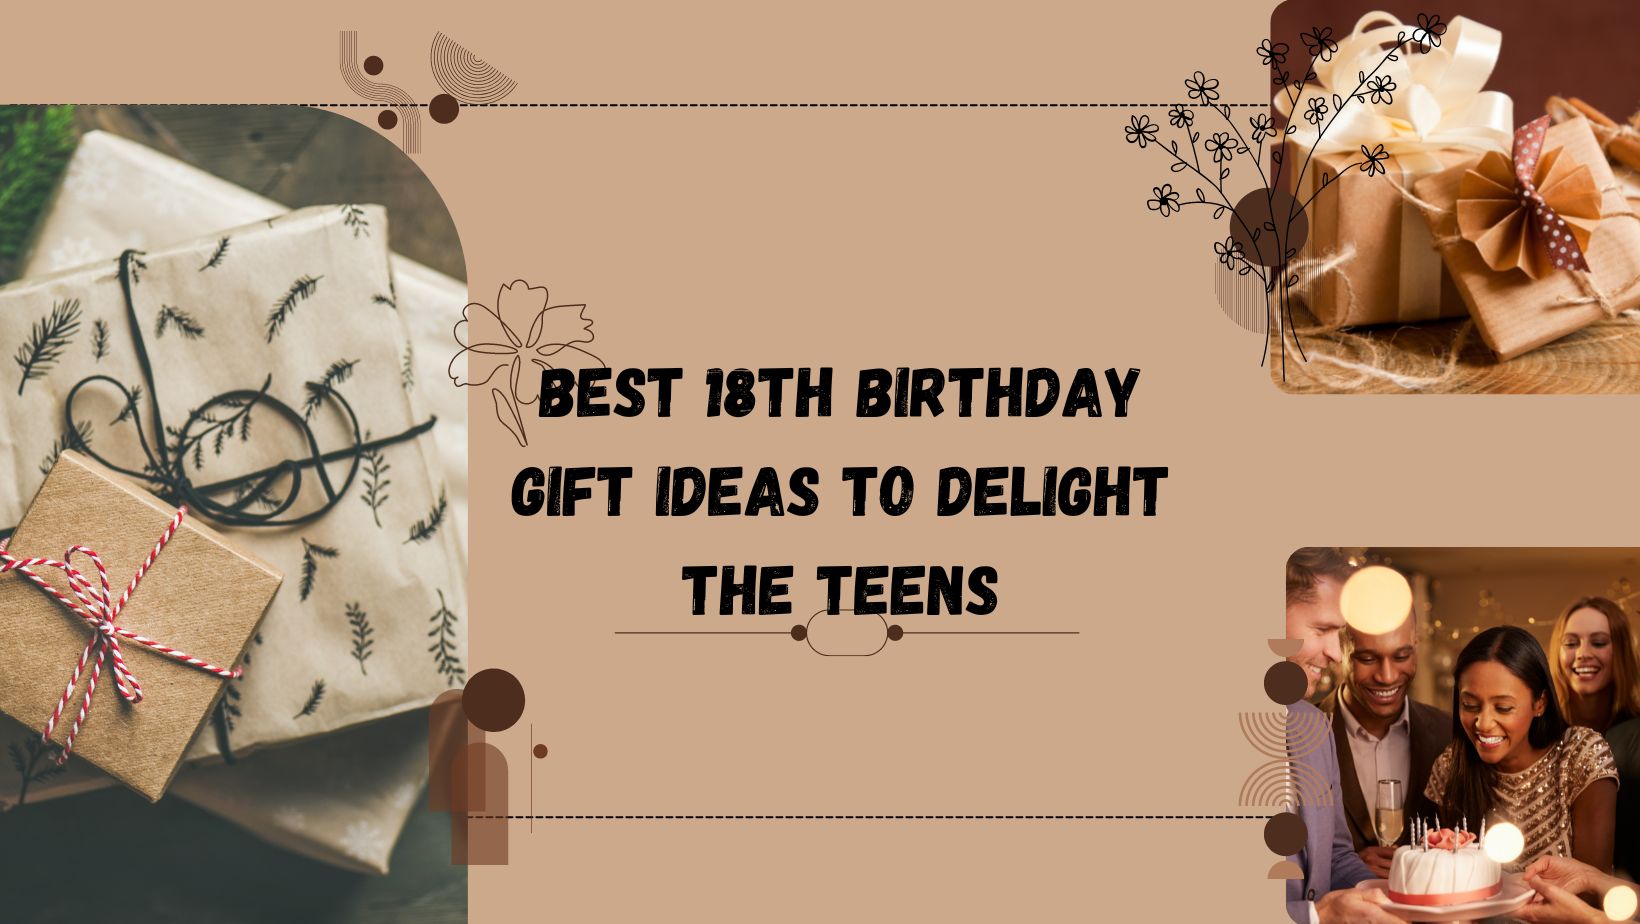 7 Best 18th Birthday Gift Ideas to Delight the Teens - My Personalised Gift Shop